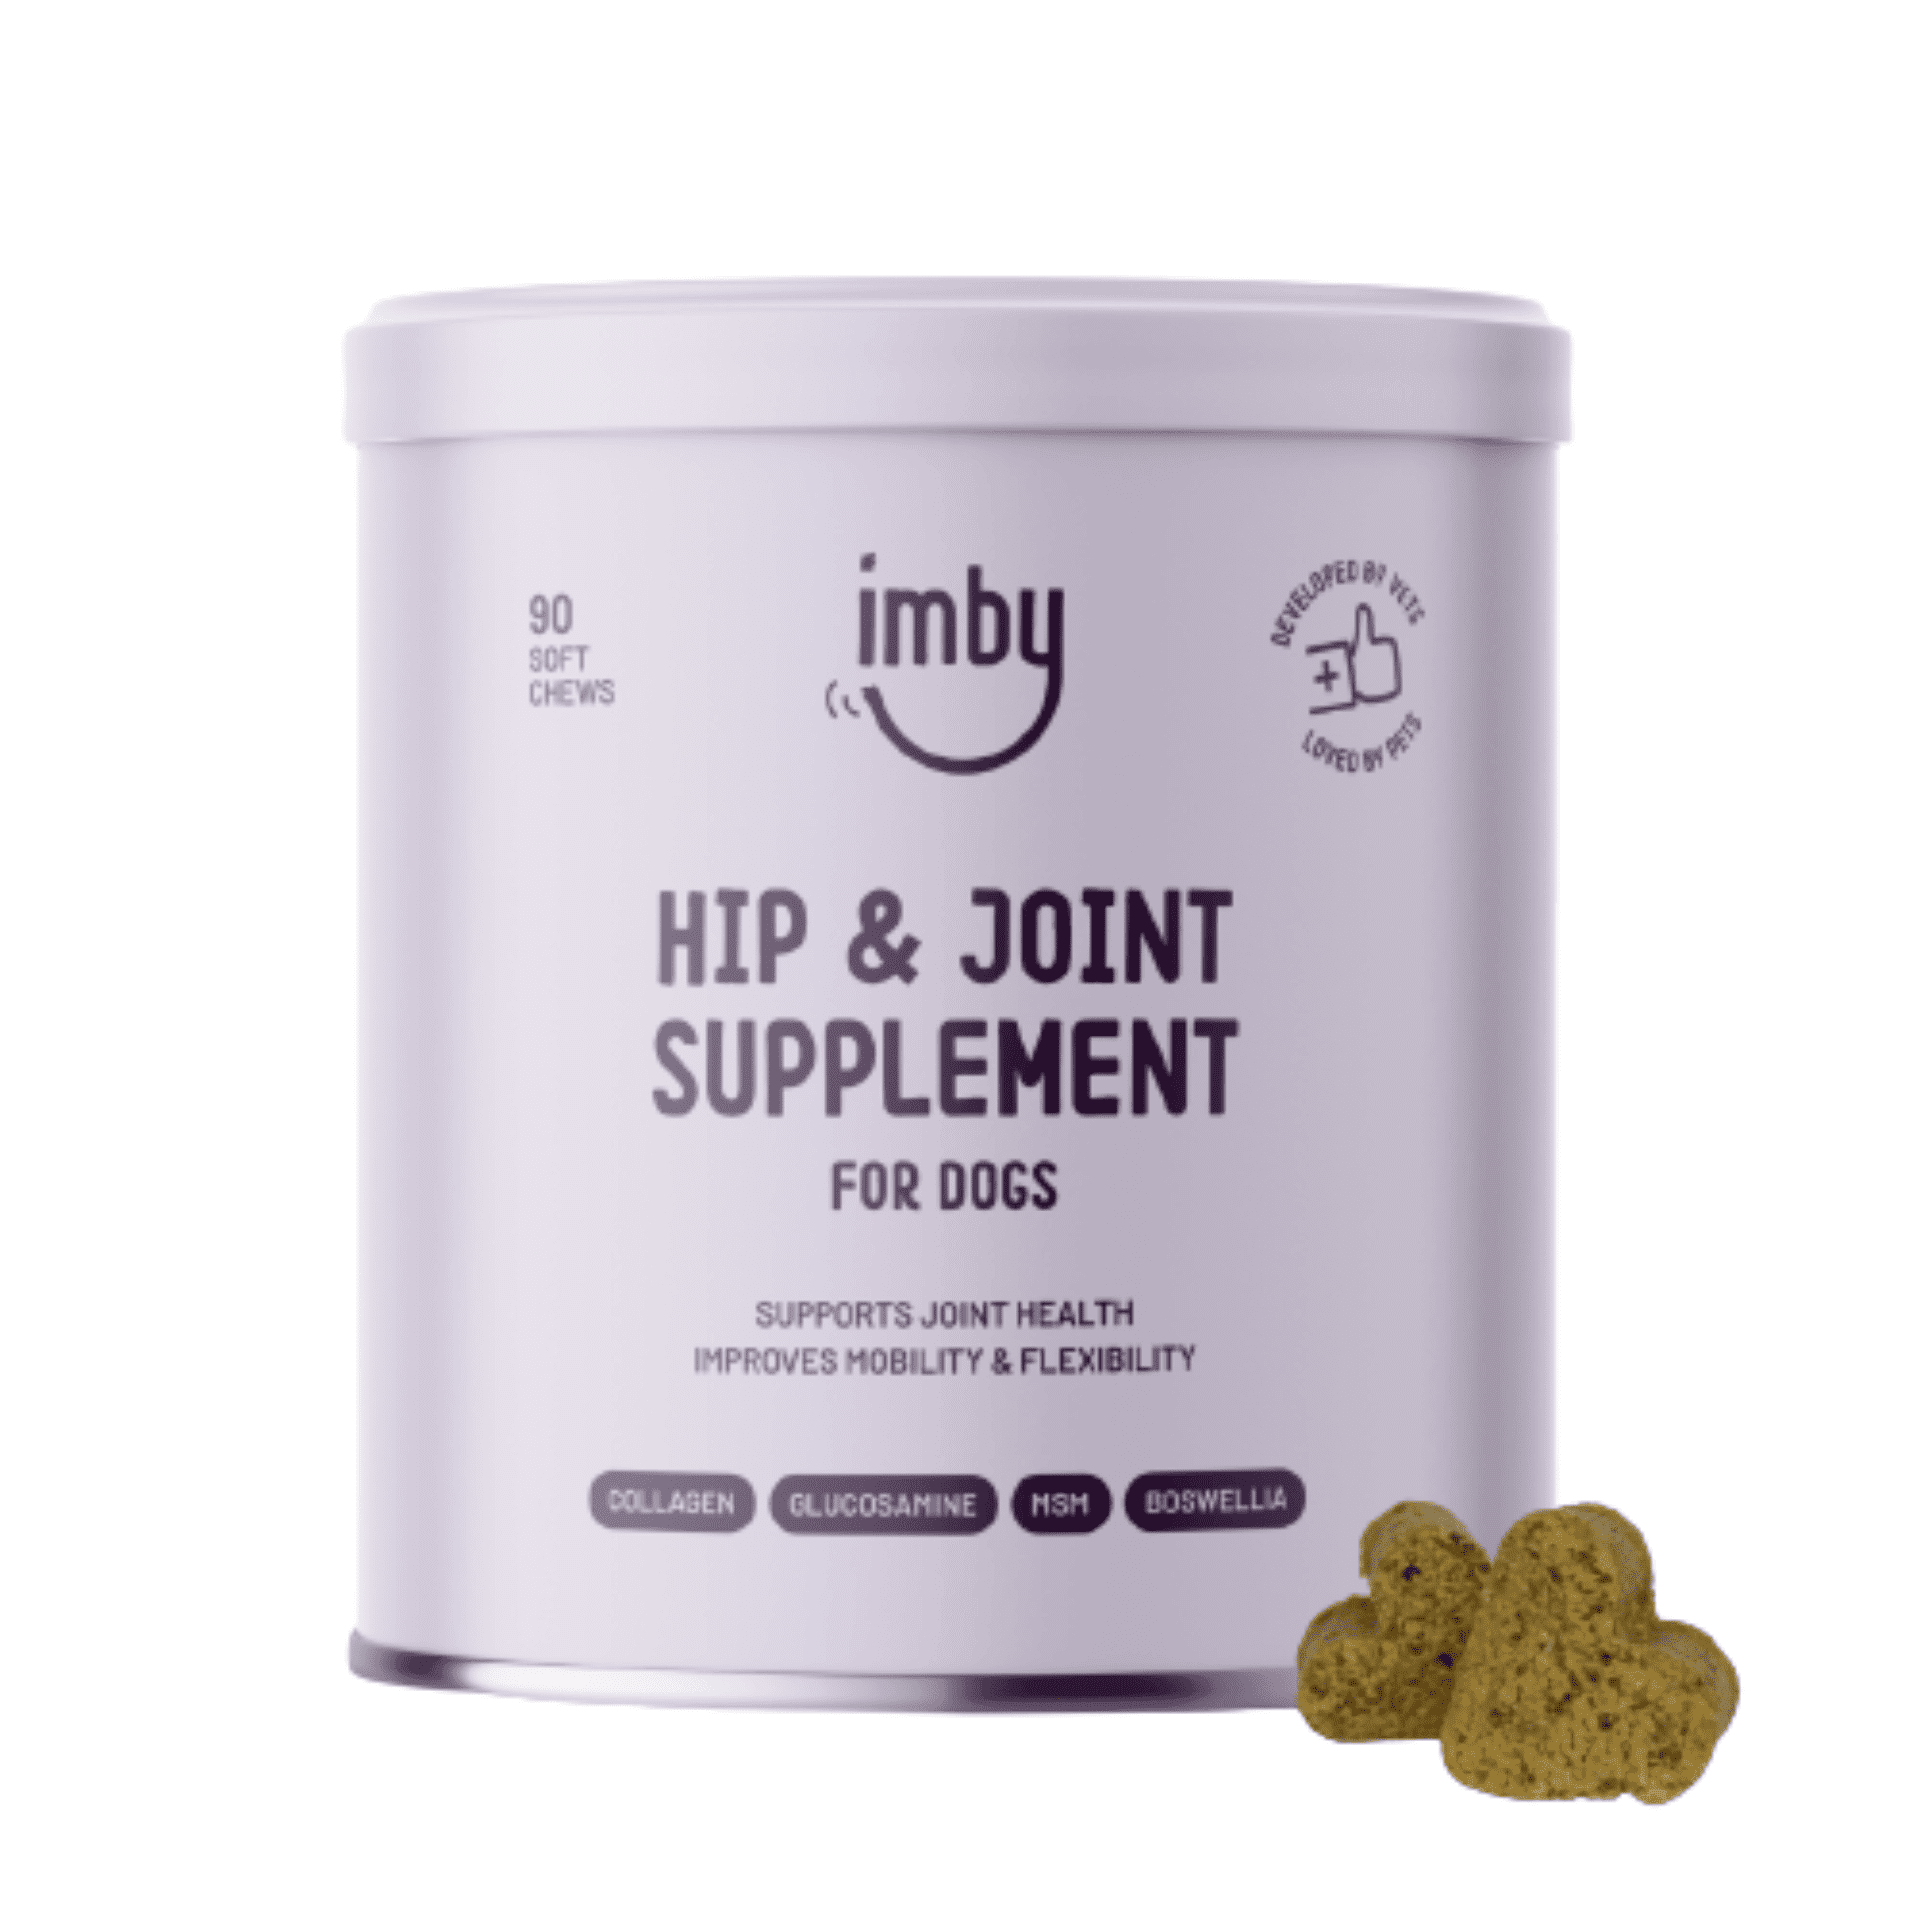 Imby Hip & Joint Supplement for Dogs